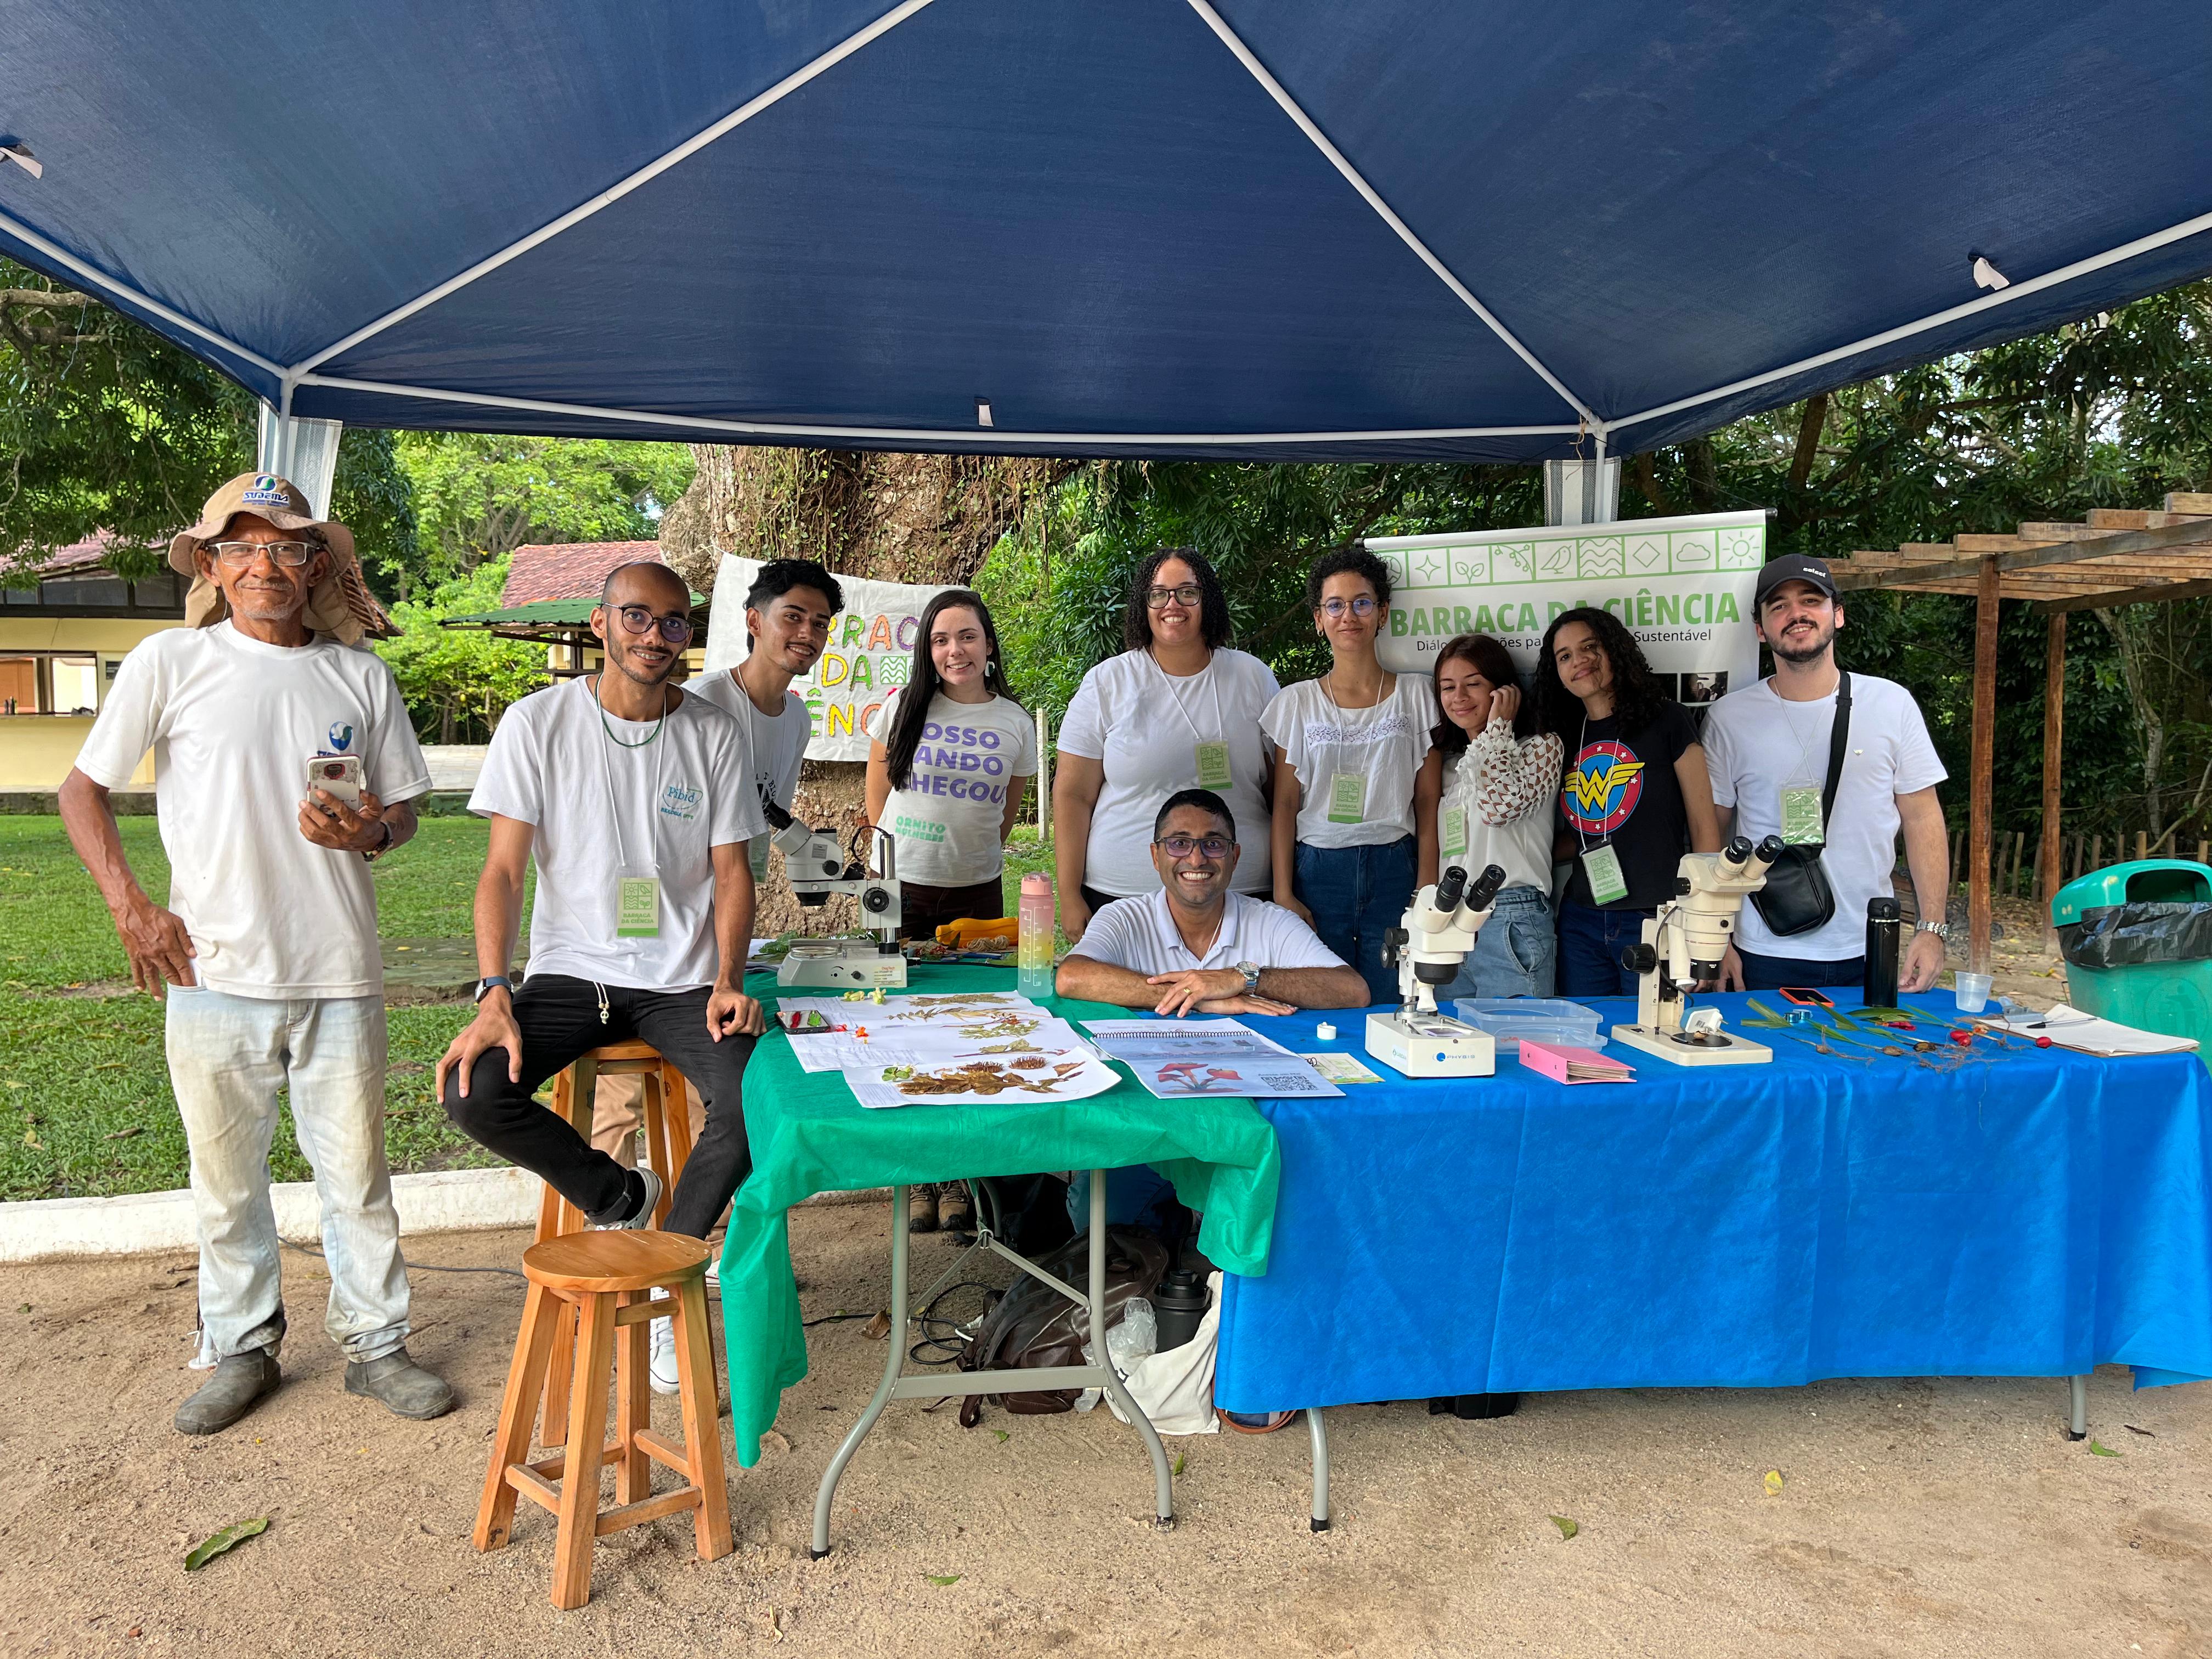 UFPB’s “Science Tent” project confirmed at the opening of the Botanical Garden’s Environment Week — Federal University of Paraiba